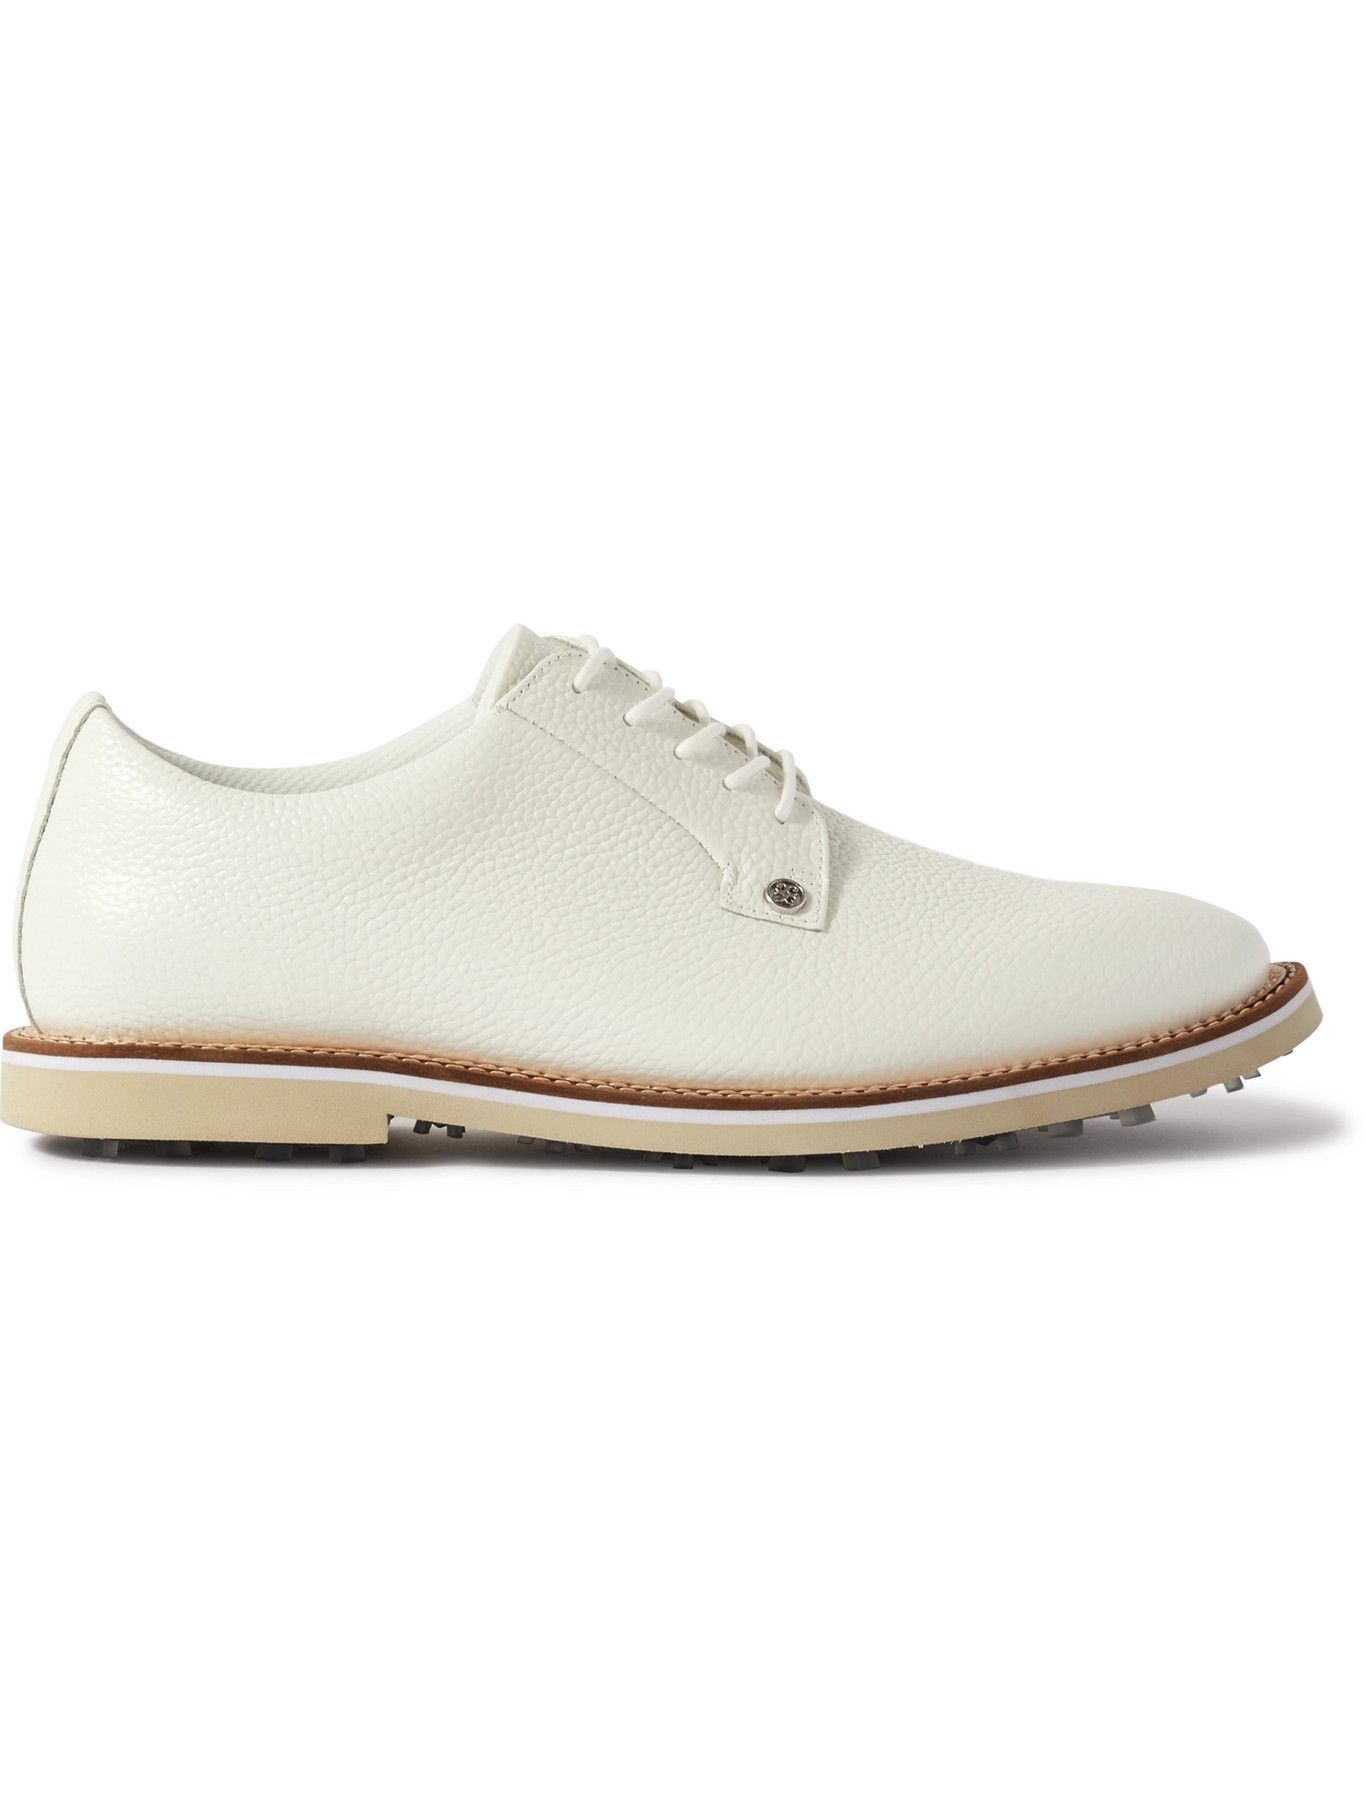 G/FORE - Gallivanter Pebble-Grain Leather Golf Shoes - White G/FORE